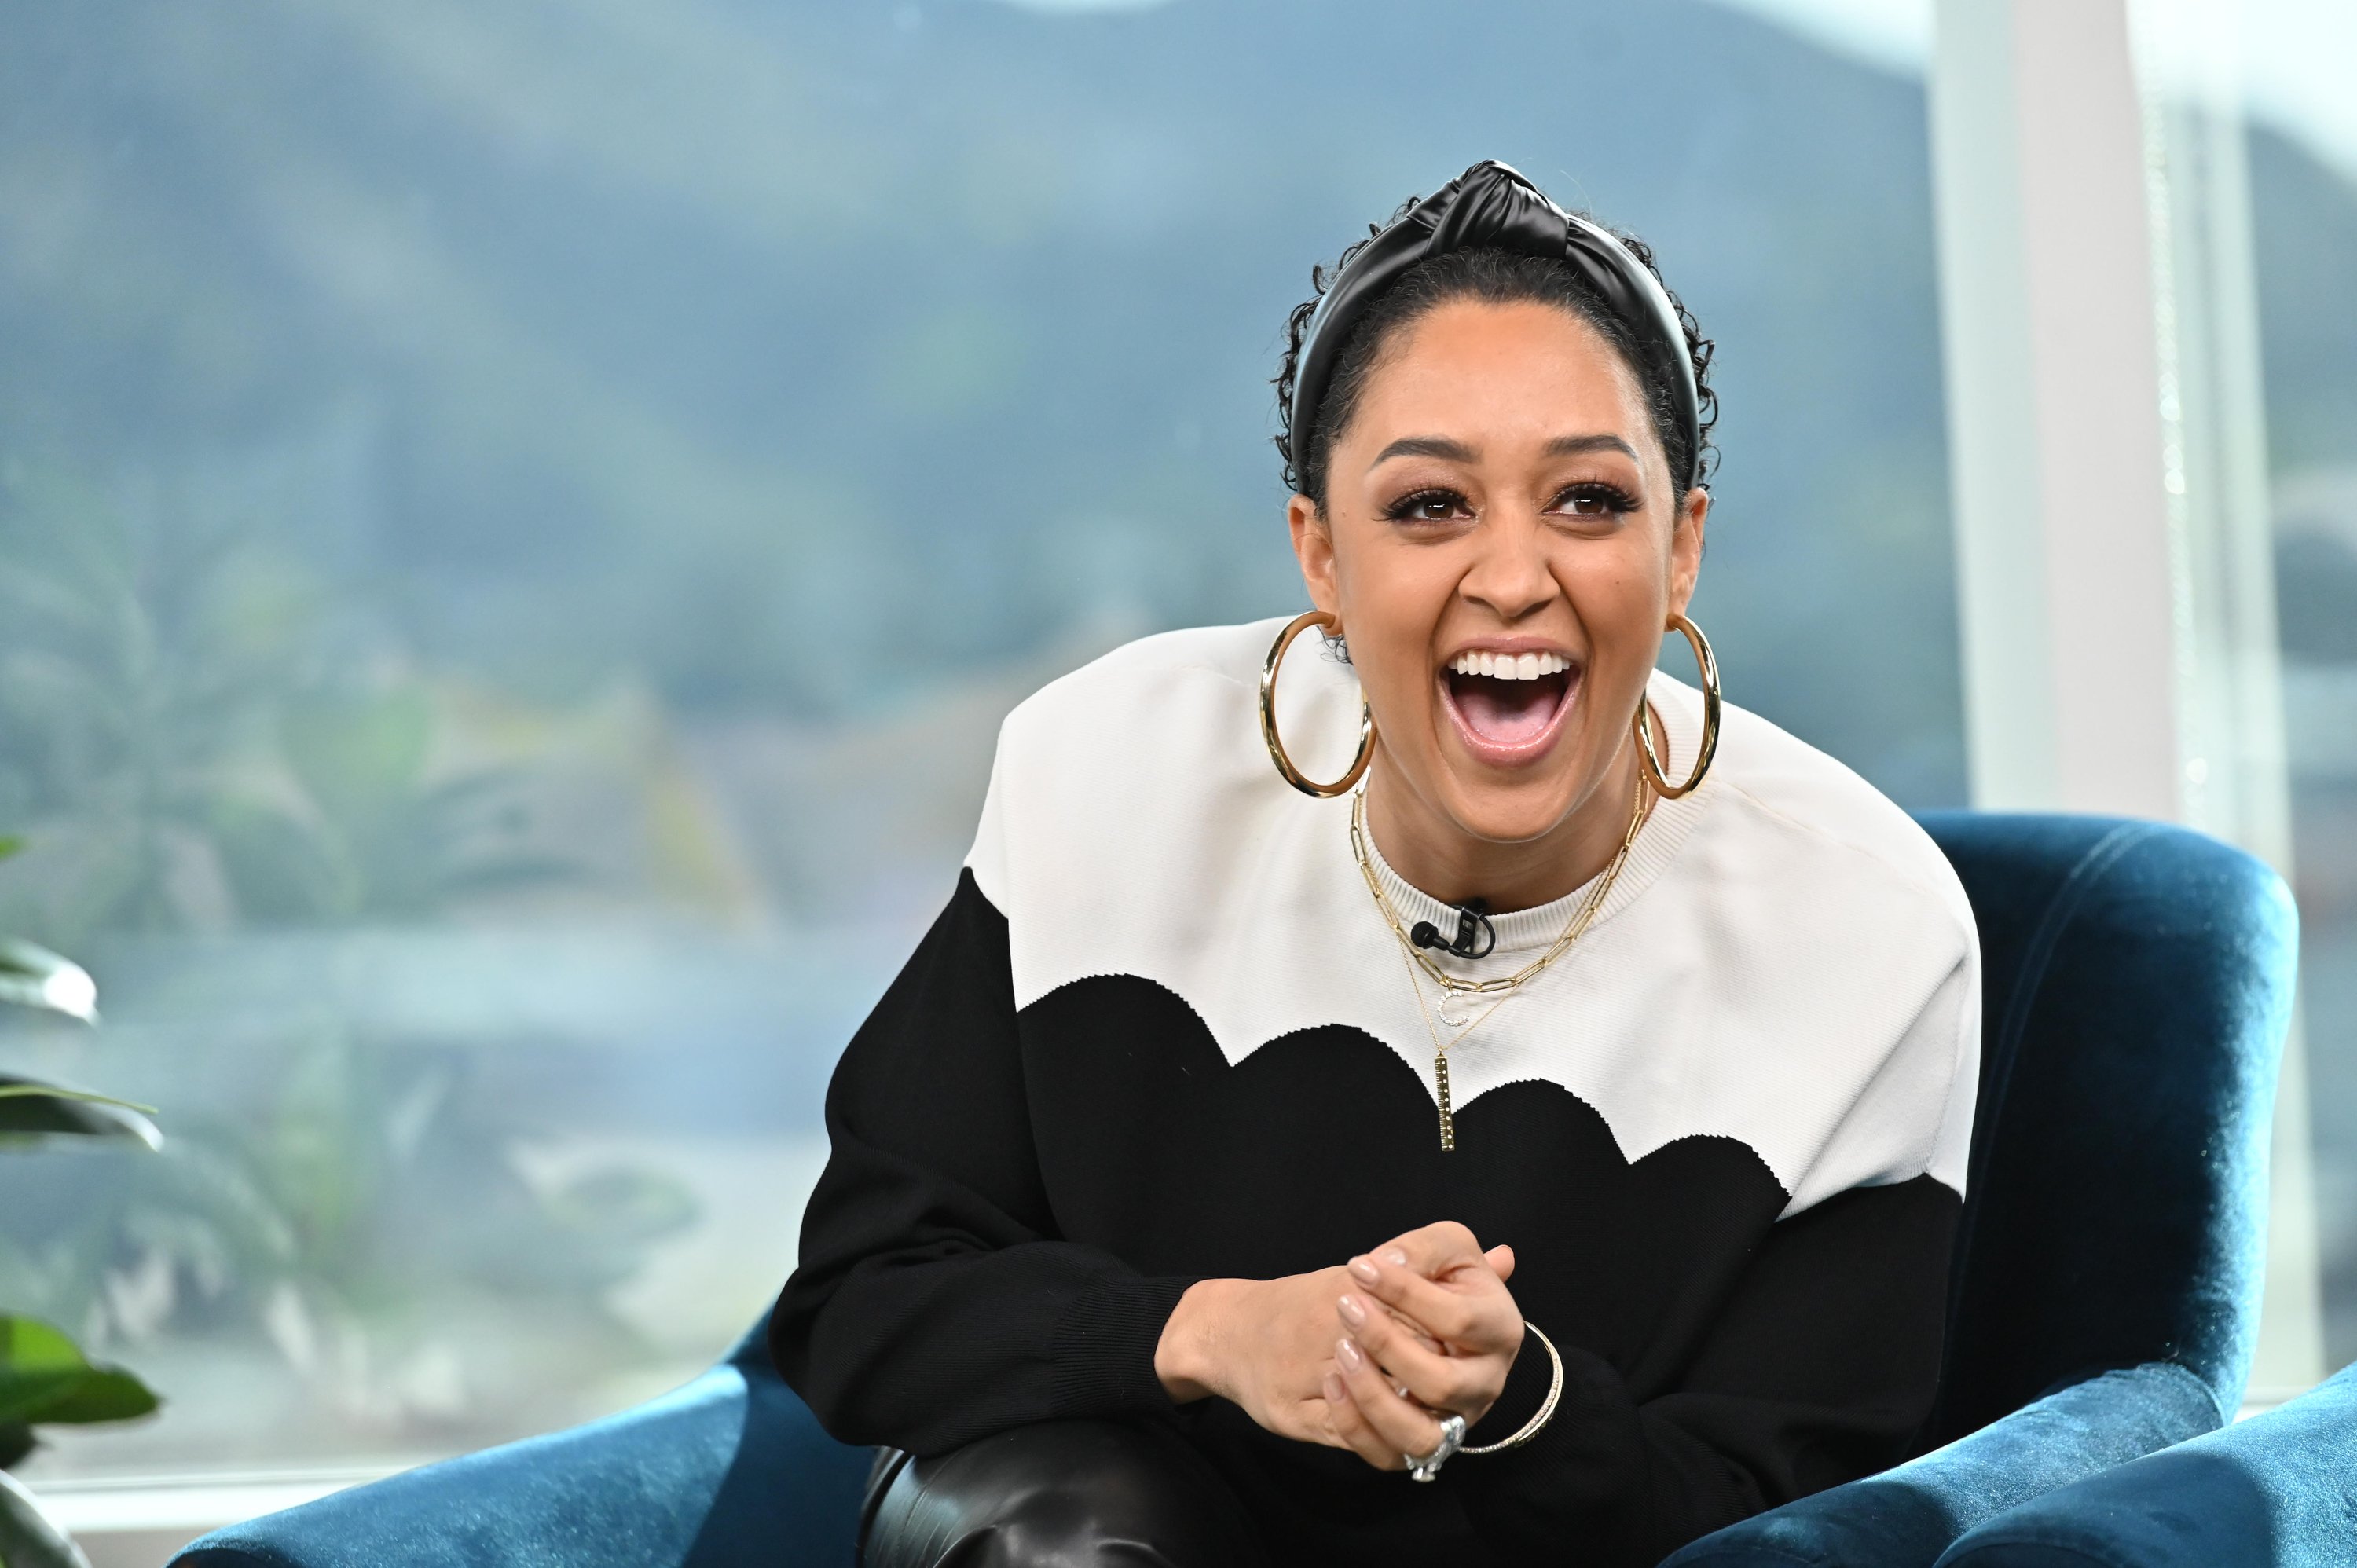 Tia Mowry-Hardrict on the set of E!’s “Daily Pop” on February 27, 2020 | Photo: Getty Images